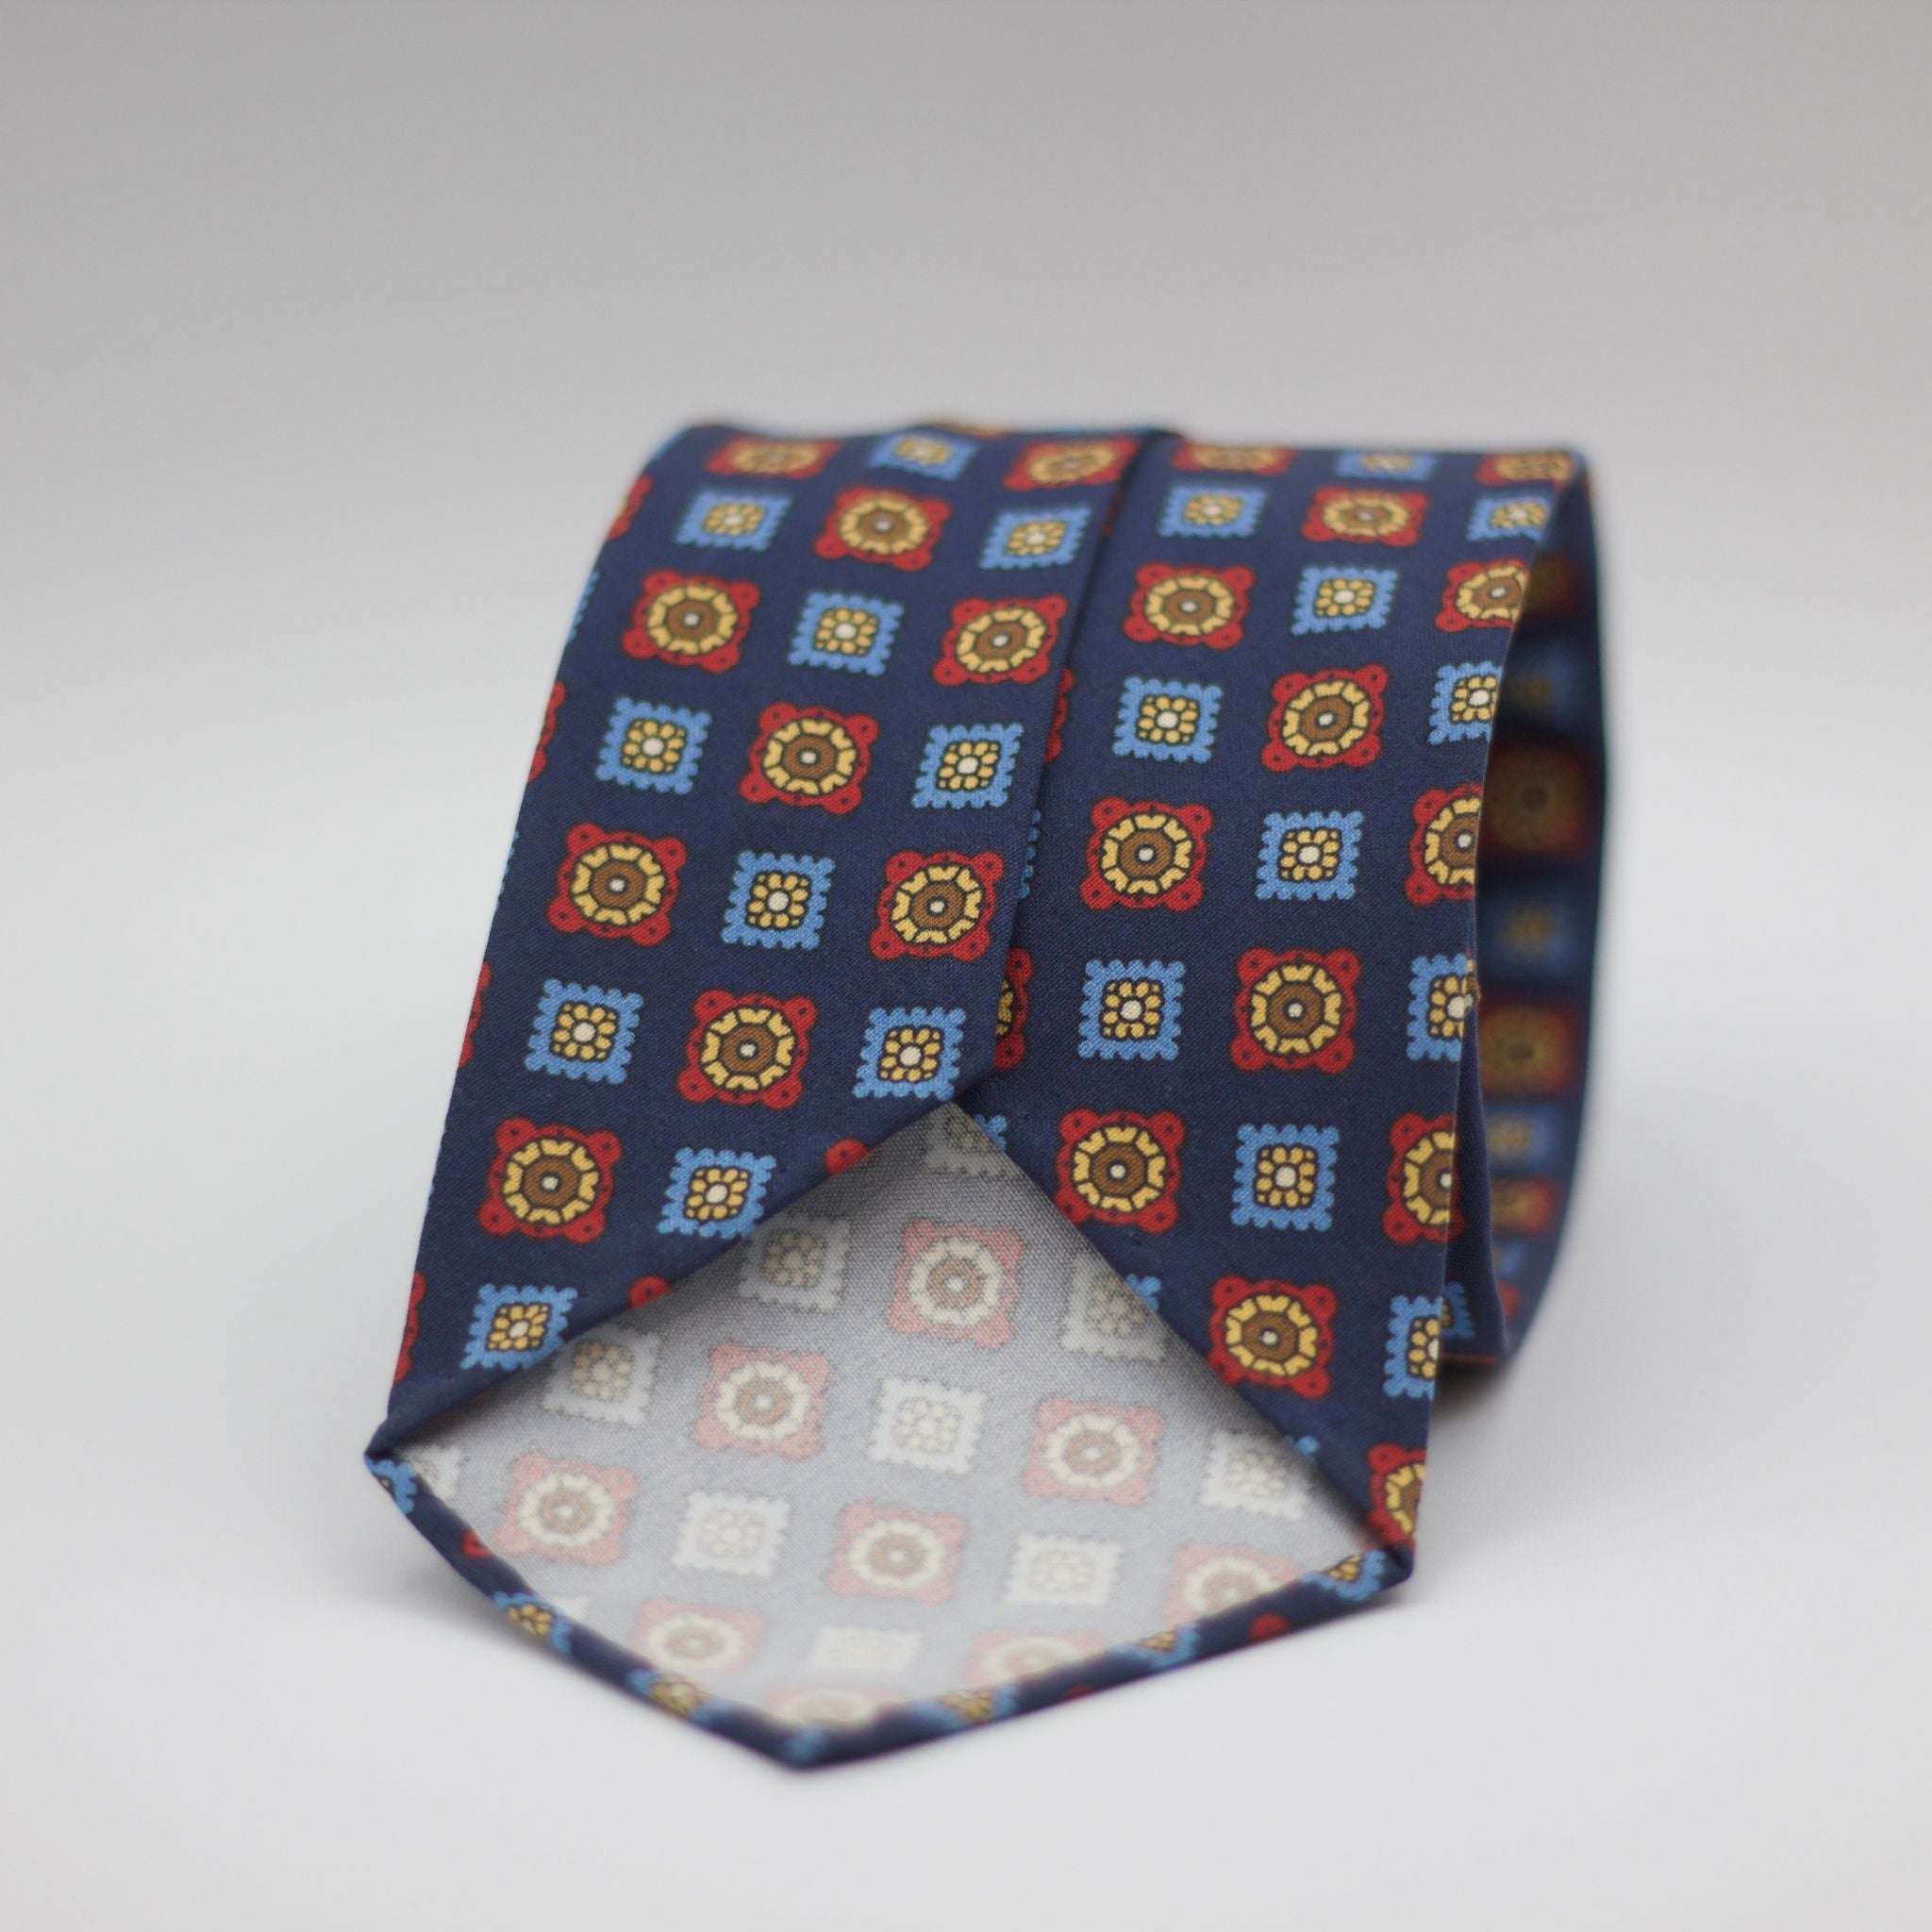 Cruciani & Bella  100% Printed Madder Silk  Italian fabric  Unlined tie Blue, light Blue, Red, Yellow and Brown motif Handmade in Italy 8 cm x 150 cm